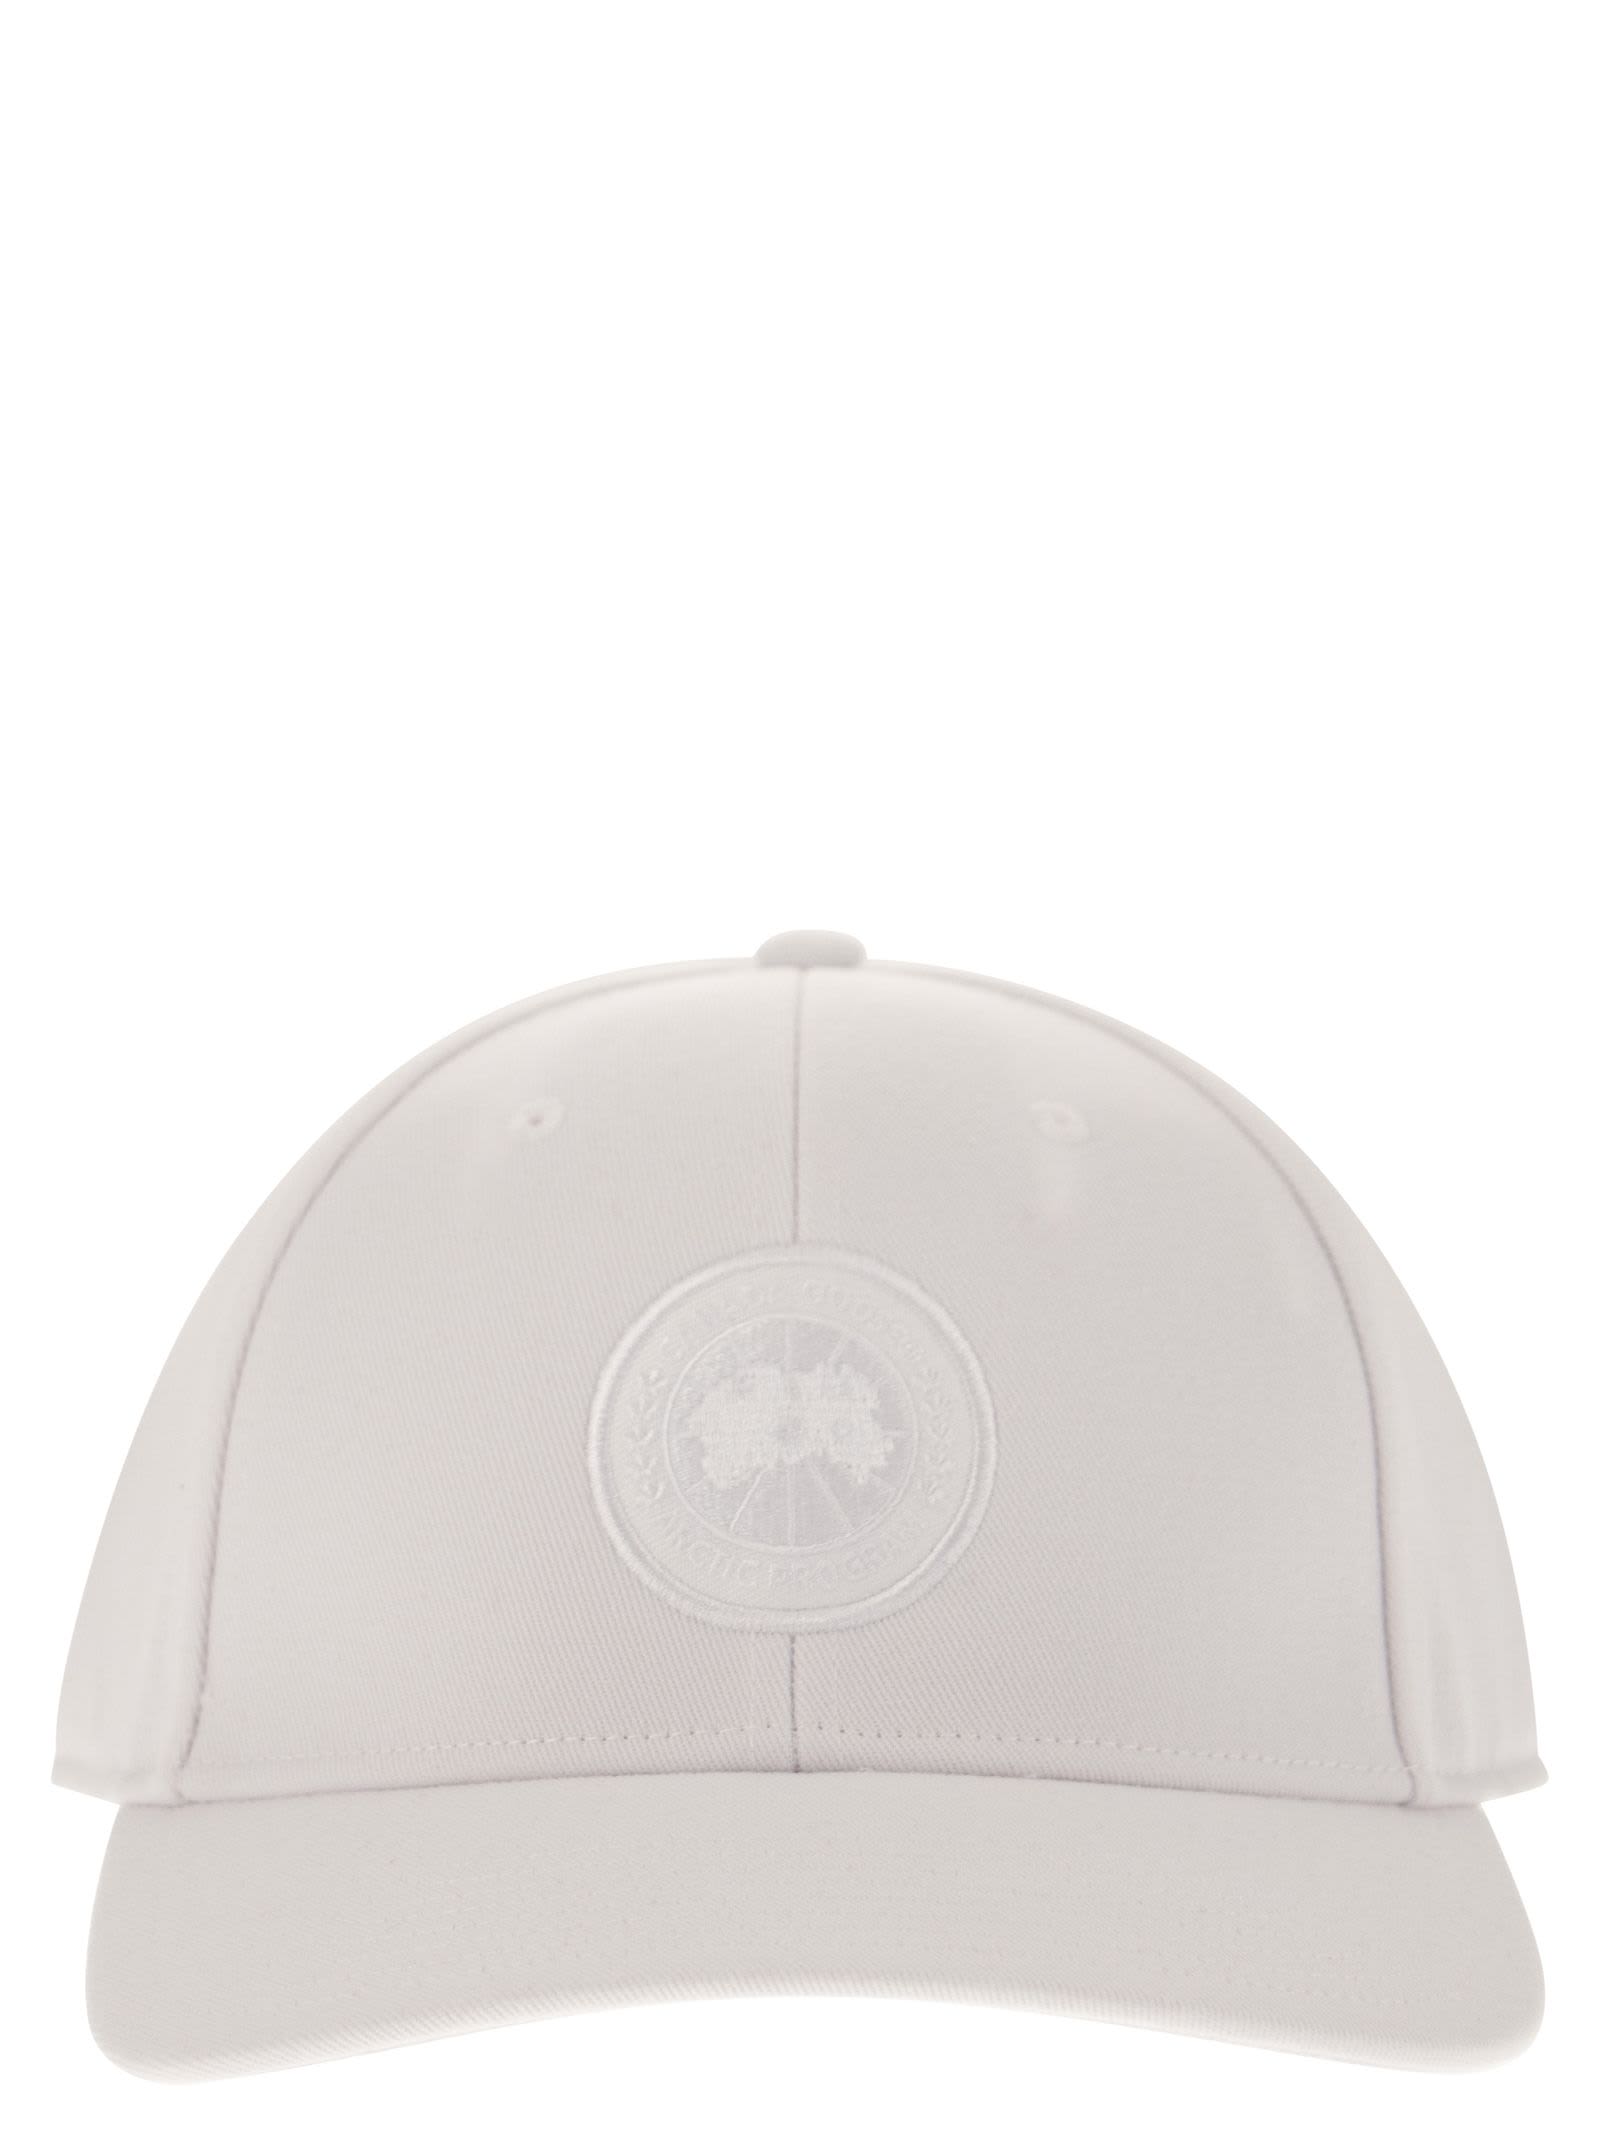 Canada Goose Tonal - Hat With Visor In White